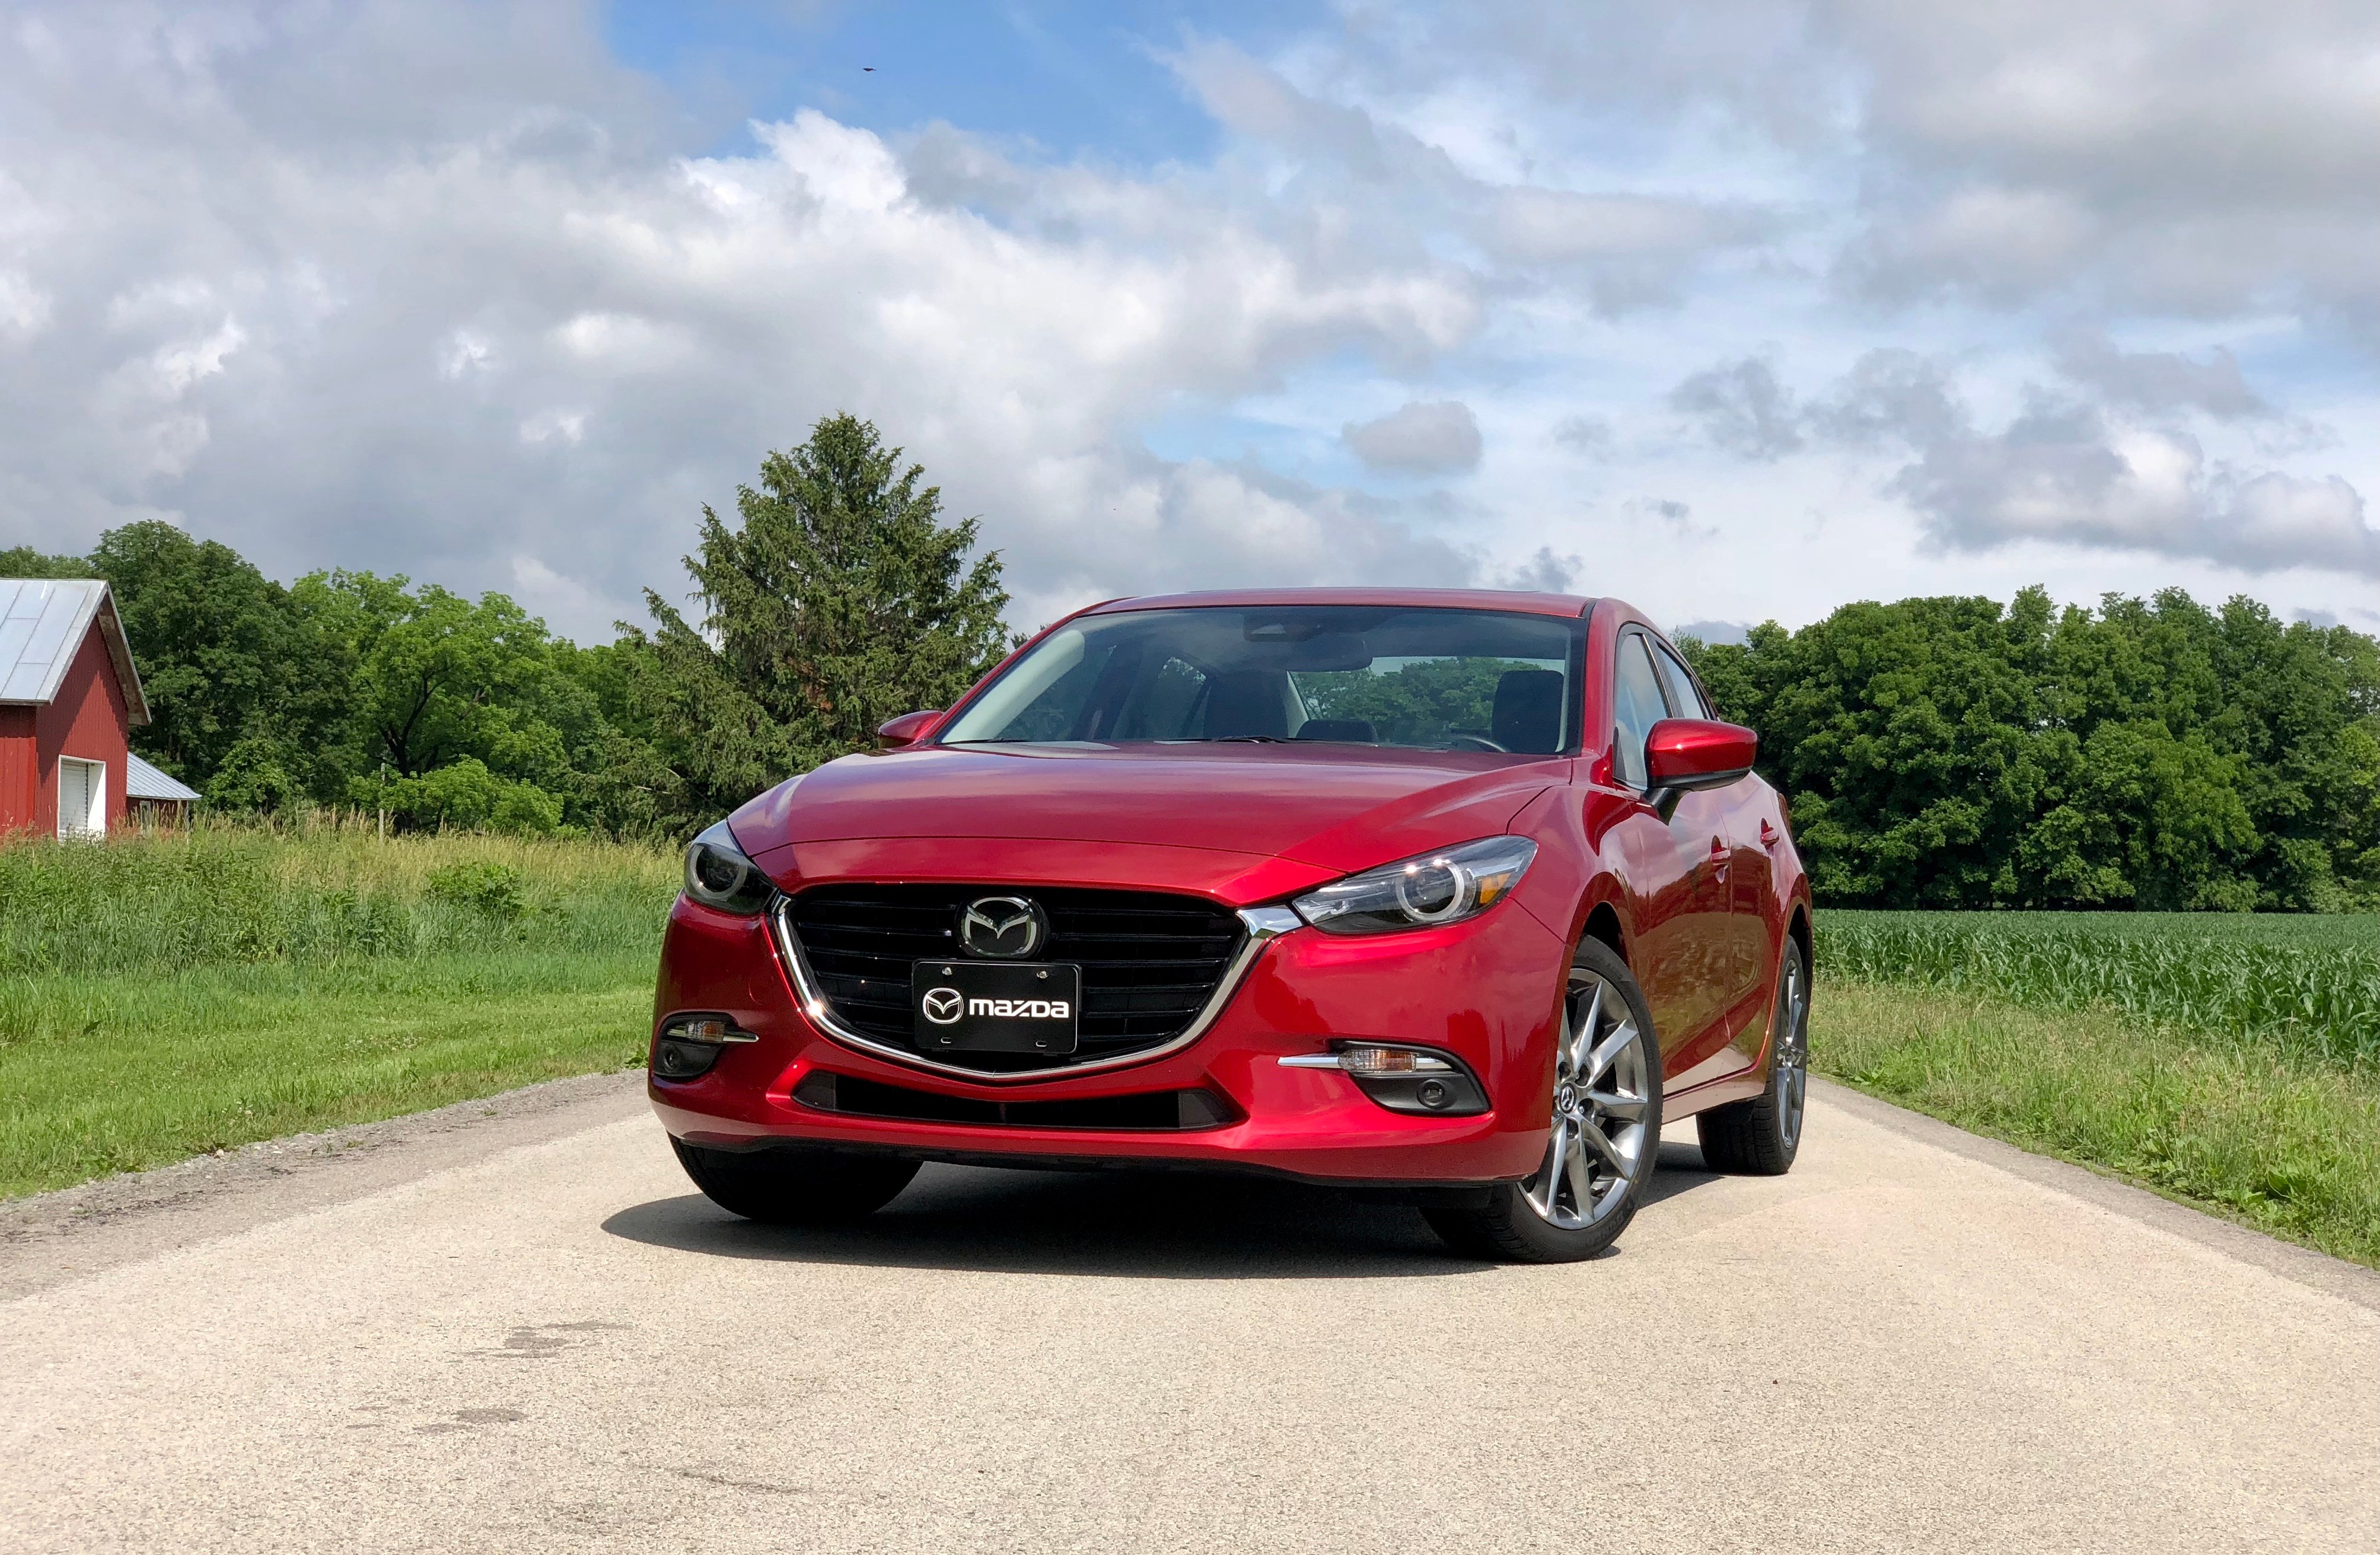 The 2018 Mazda 3 is an excellent choice.